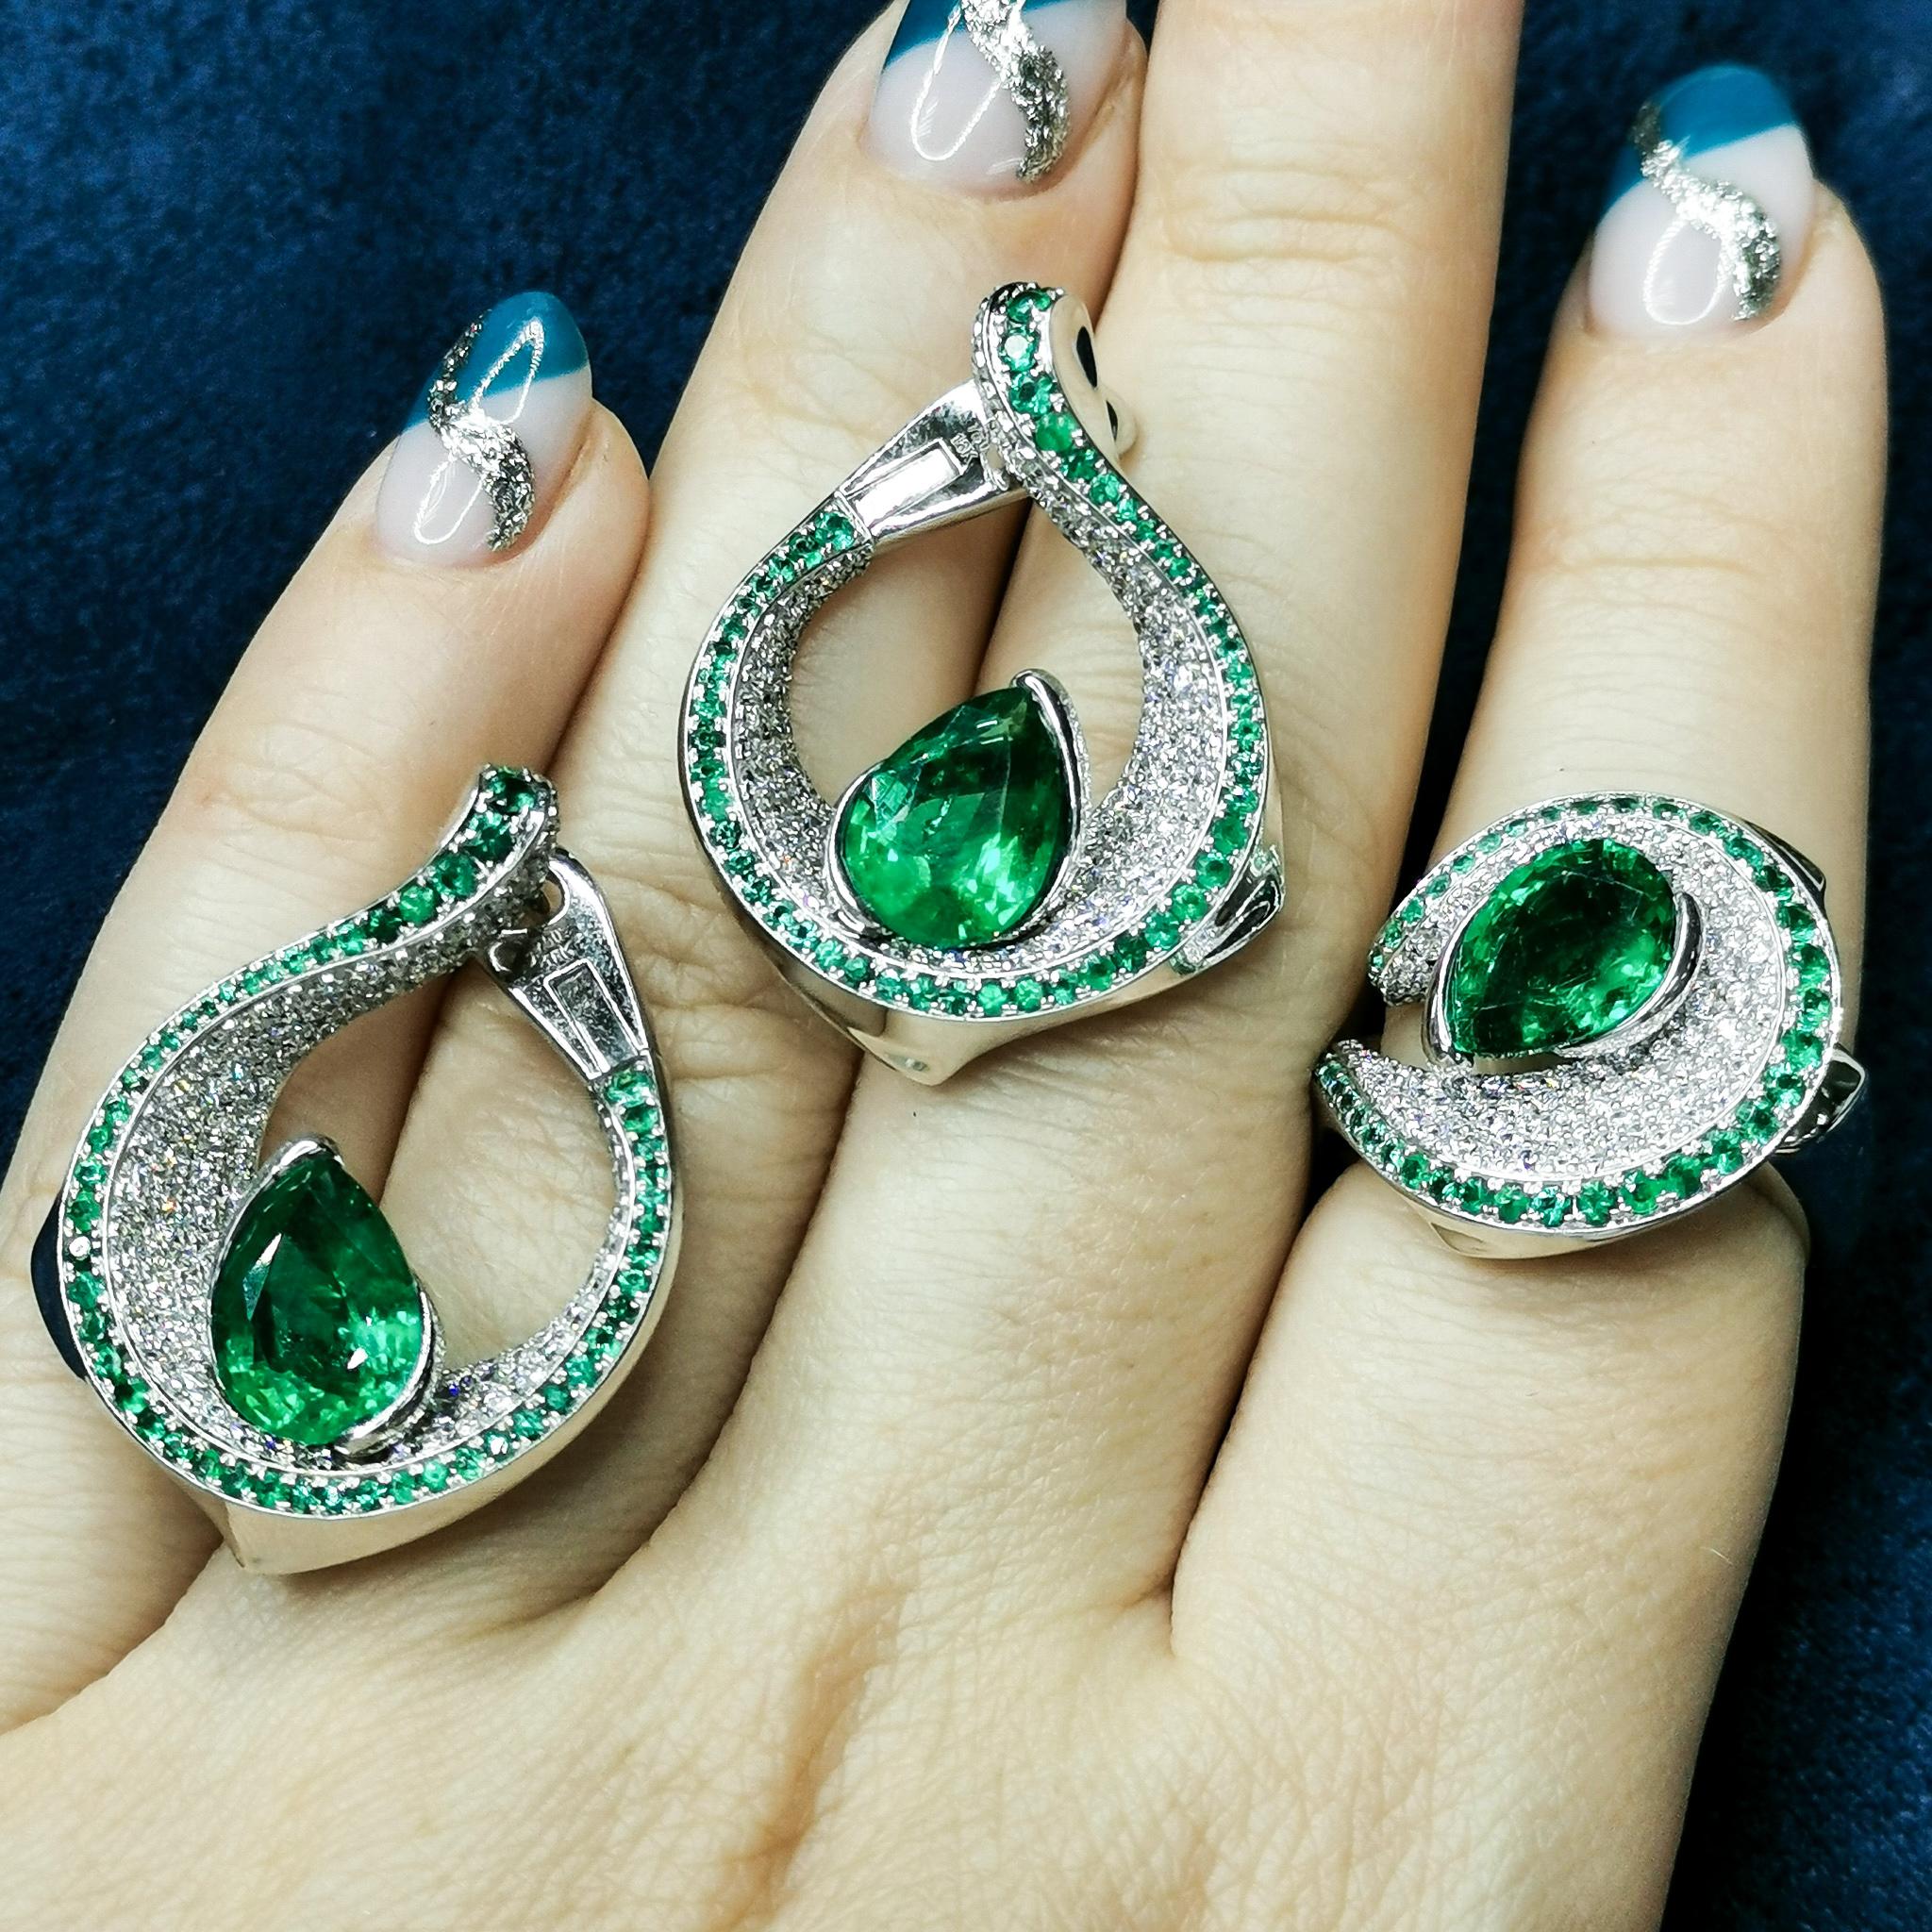 Emerald Pear Shape 6.25 Carat Diamonds Emeralds 18 Karat White Gold Suite
Contrasting colors are always eye-catching. Our new Suite is one of those. Bright Pear-shaped Emeralds rests on a snow-white plateau of  Diamonds, which are framed by a line